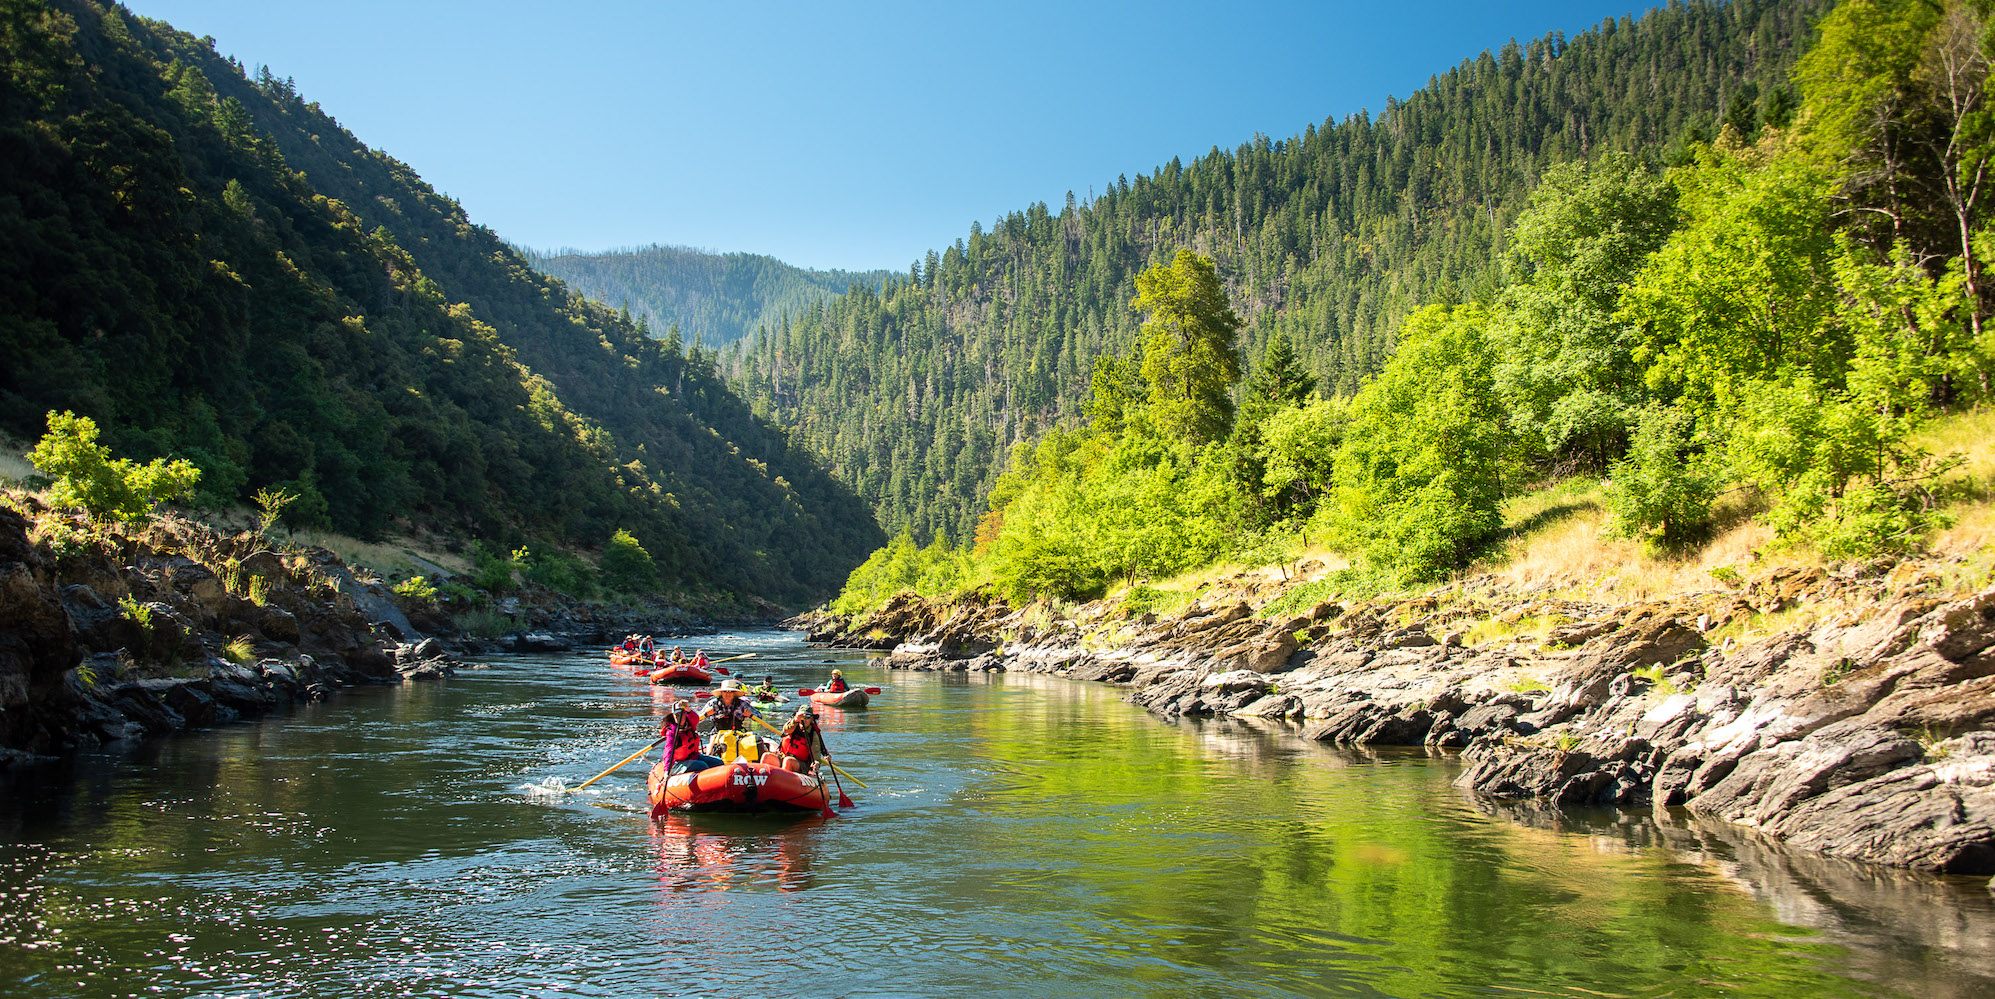 Whitewater rafting through the Rogue River in Southern Oregon